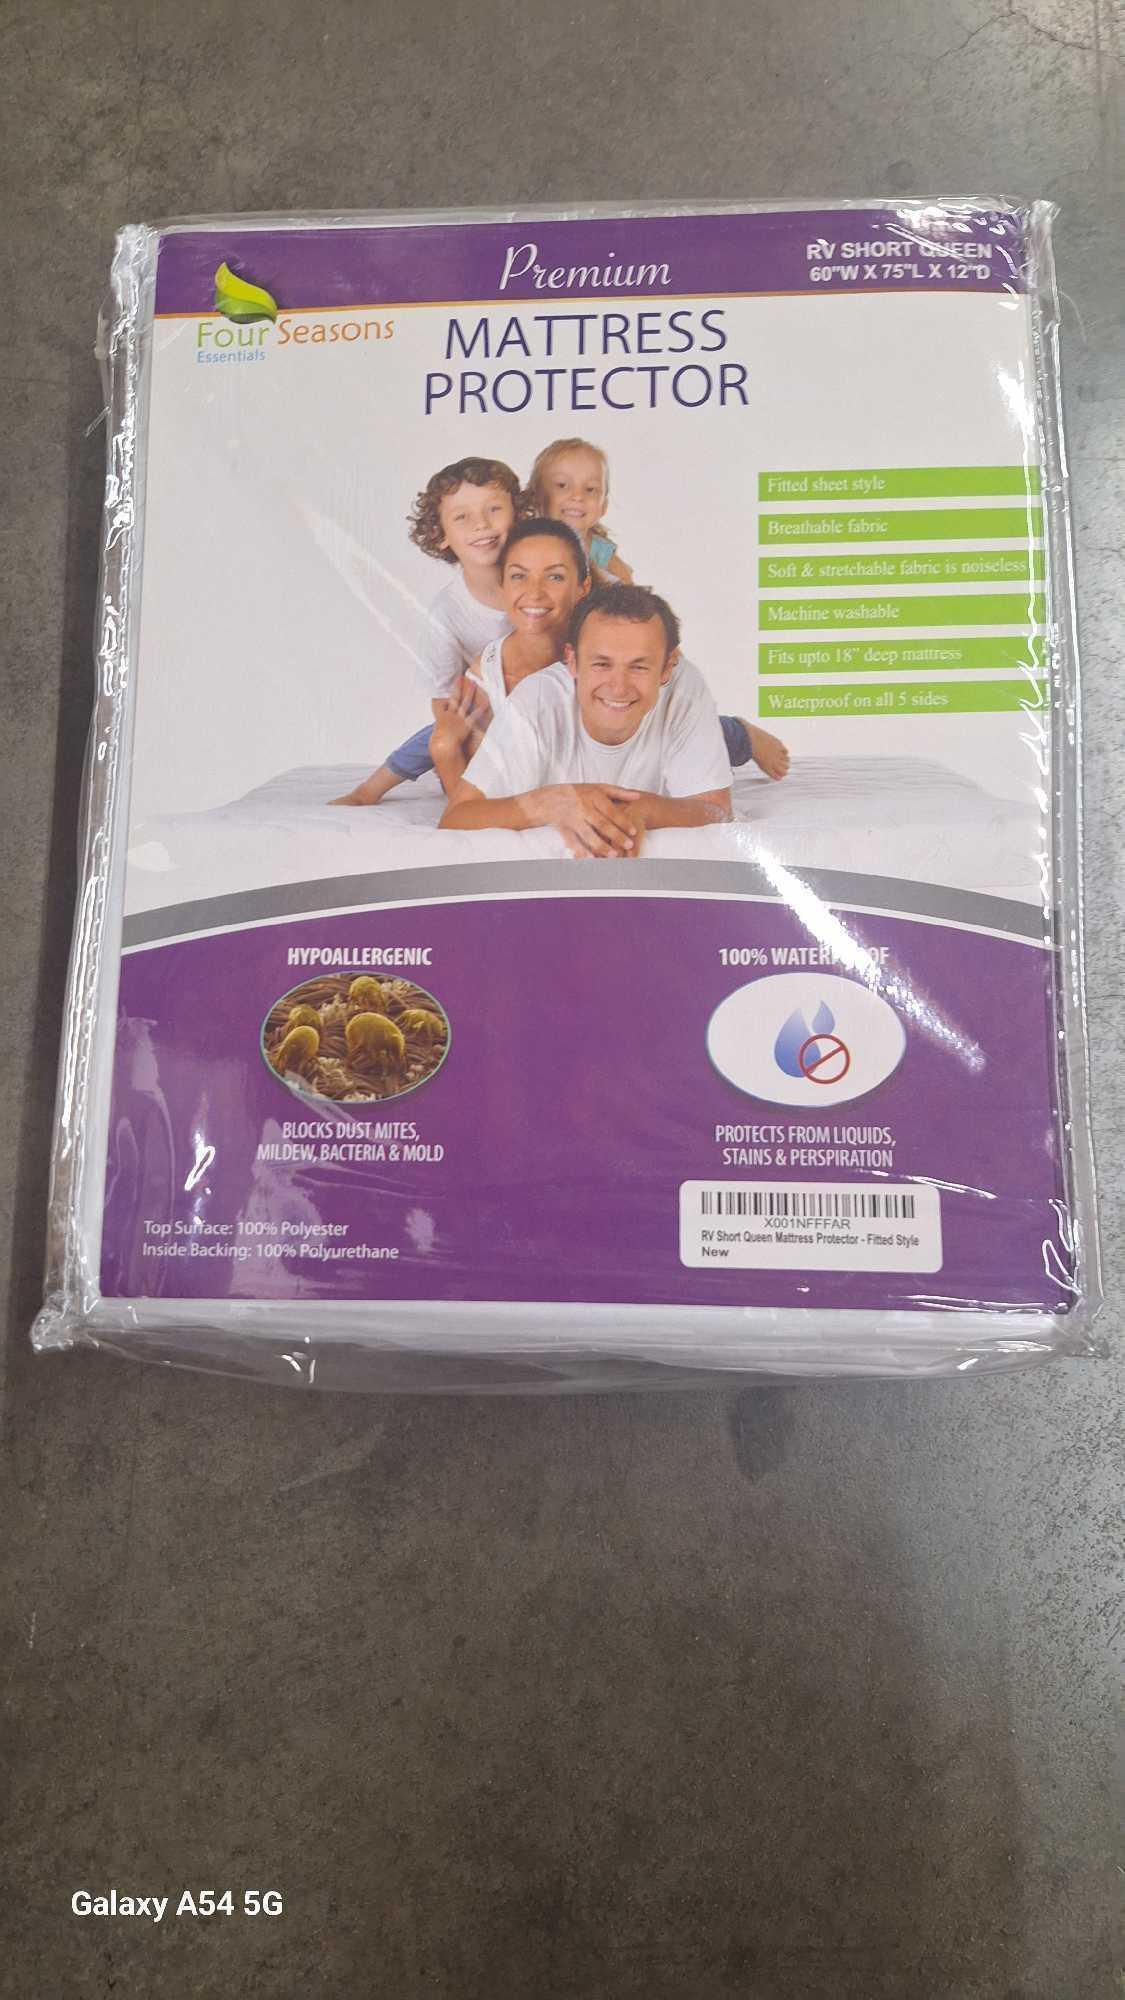 RV Short Queen Mattress Protector 60" W x 75?L - Low Profile Fits 5" to 8" Thick , $52.00 MSRP